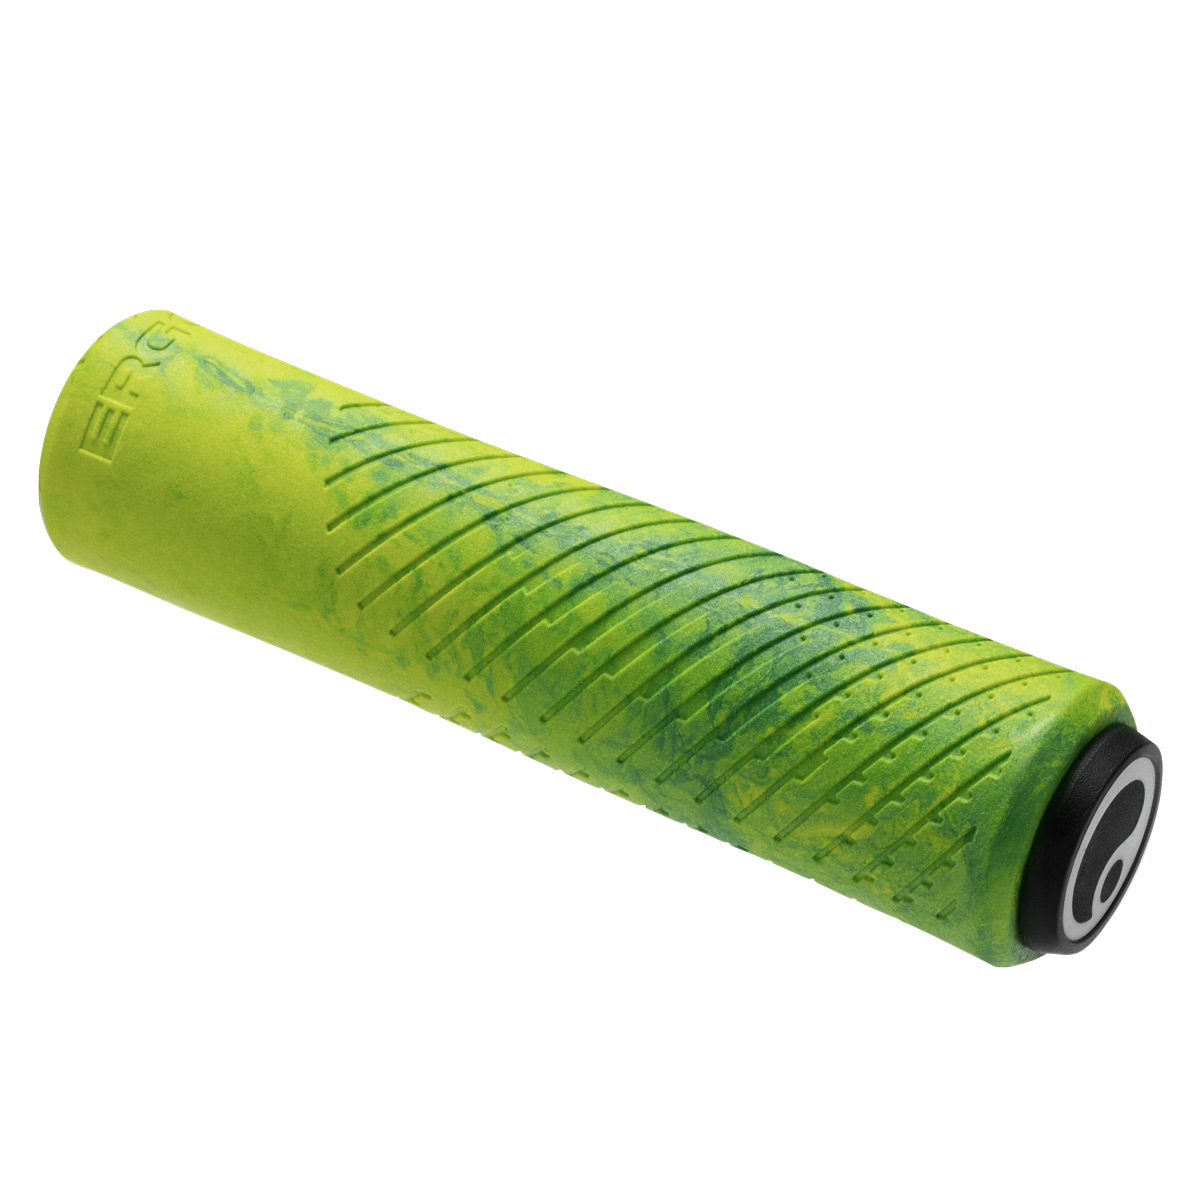 Picture of Ergon GXR Grips - S - Lava yellow/green